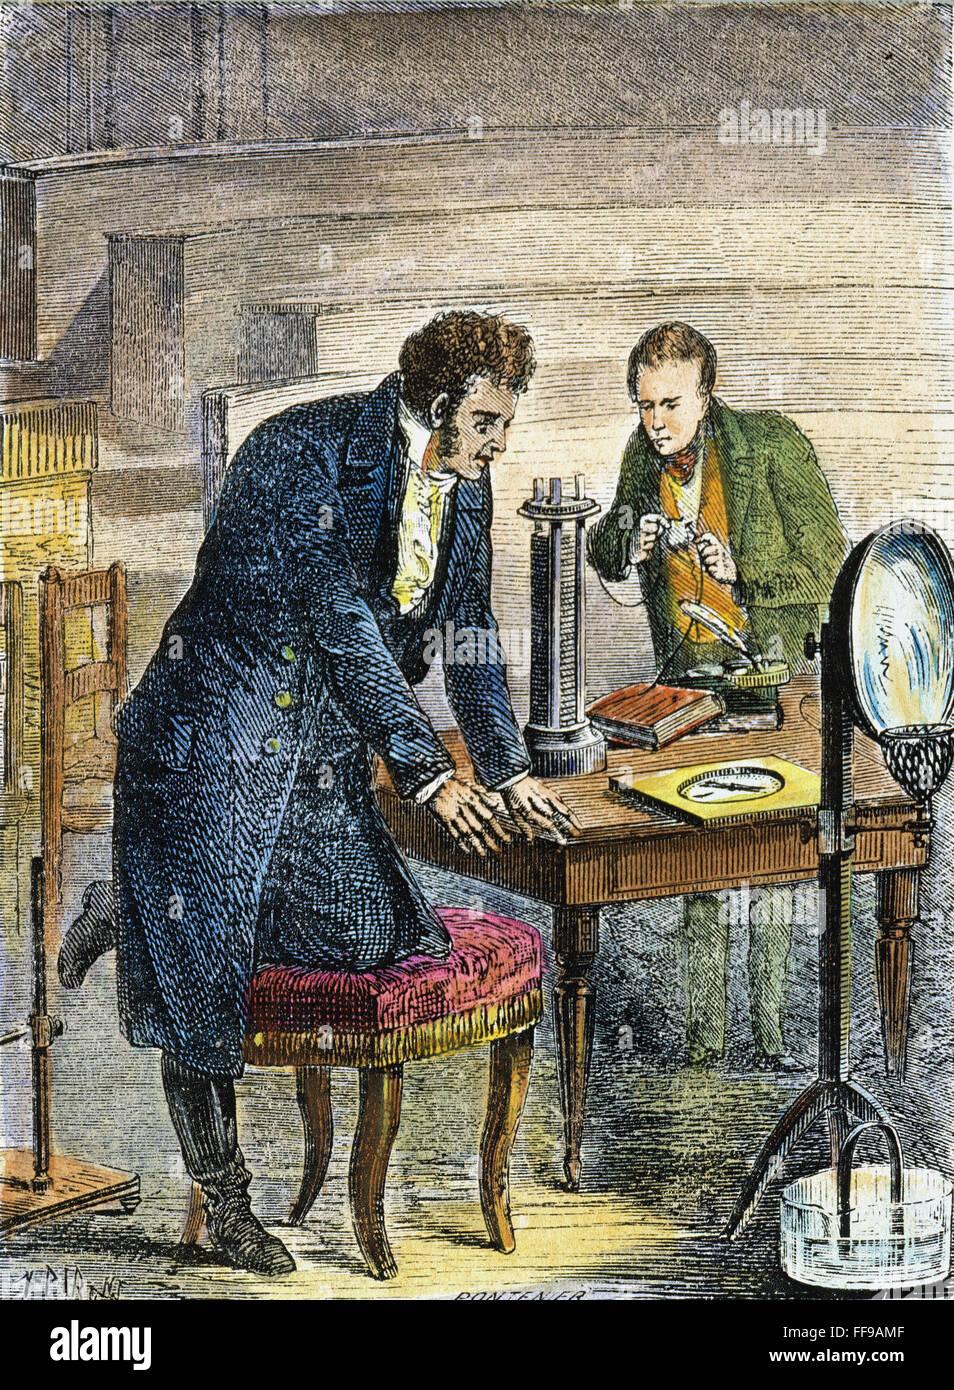 HANS CHRISTIAN OERSTED. /nOersted's discovery in 1819 that a pivoted magnetic needle turns at right angles to a conductor carrying an electric current: colored engraving, 19th century. Stock Photo